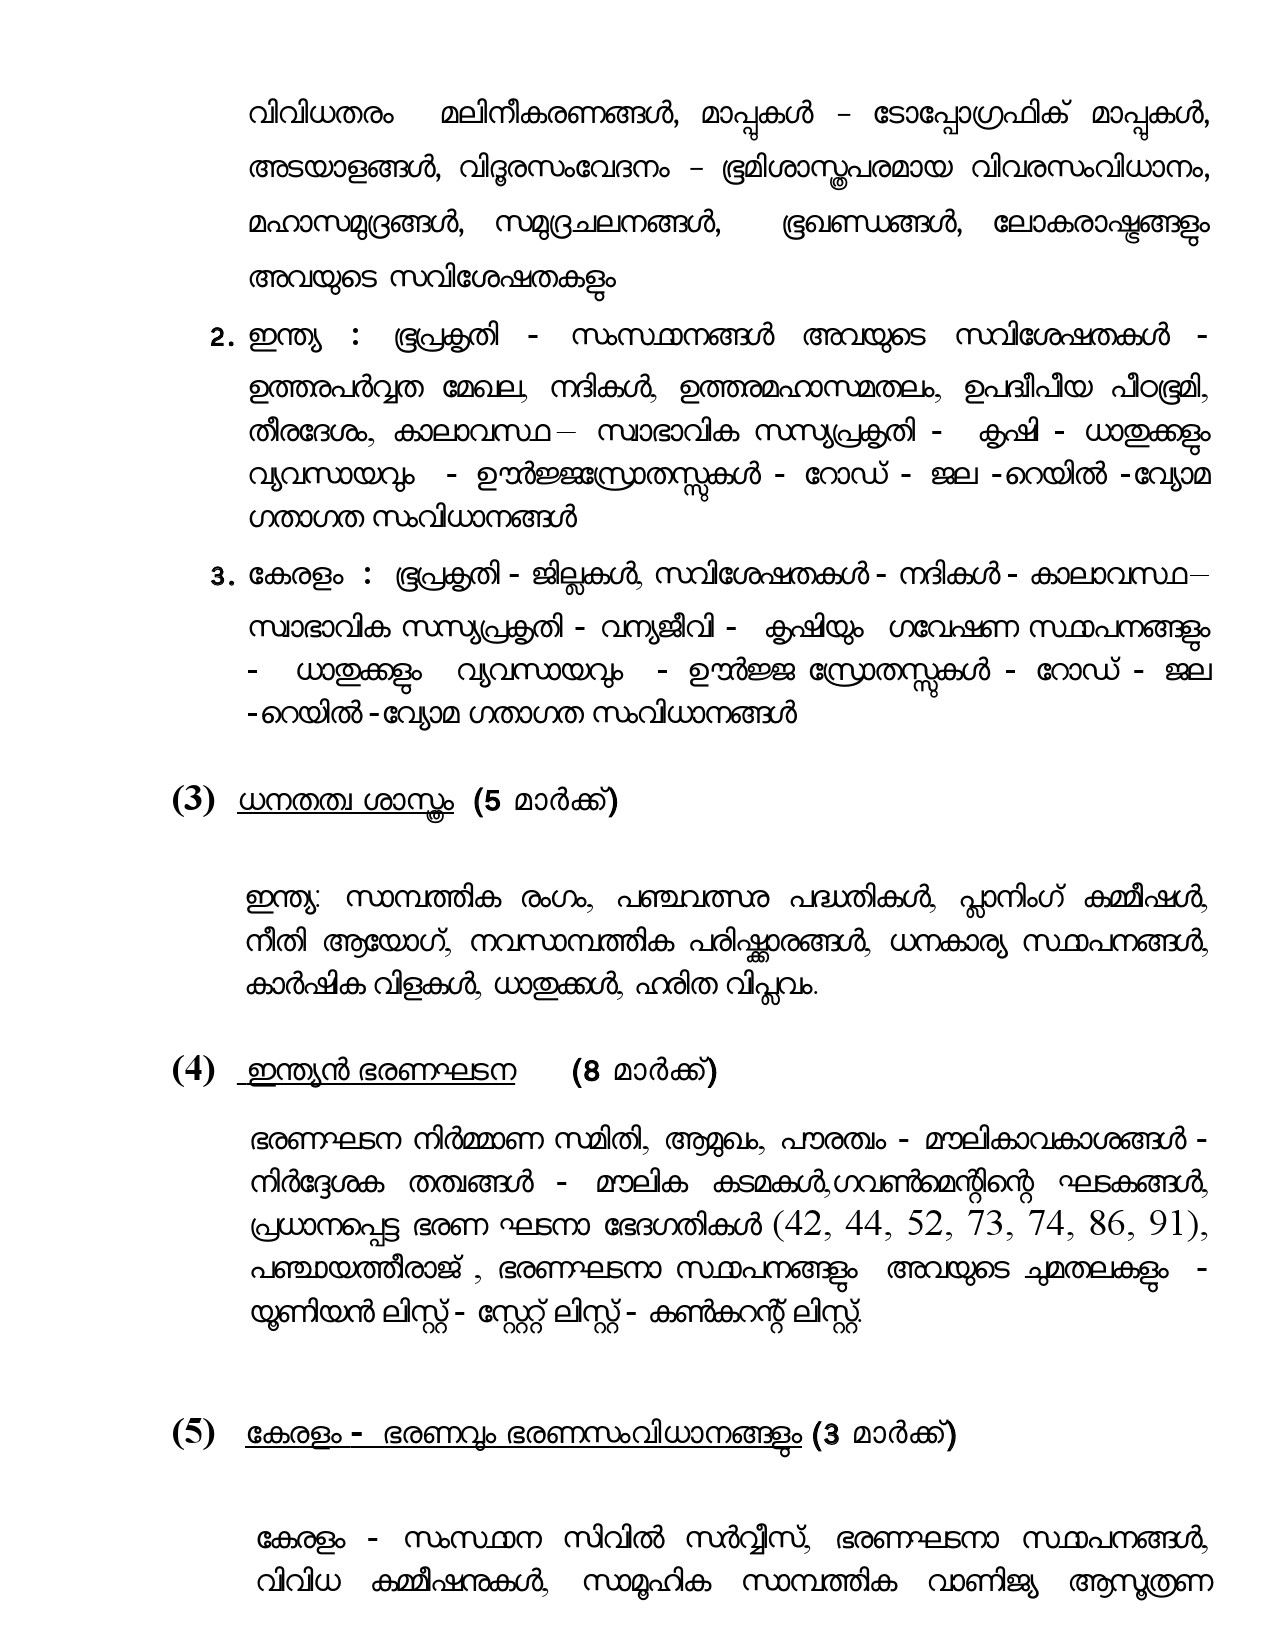 Syllabus For 2023 OMR Examination Of Civil Police Officer - Notification Image 3